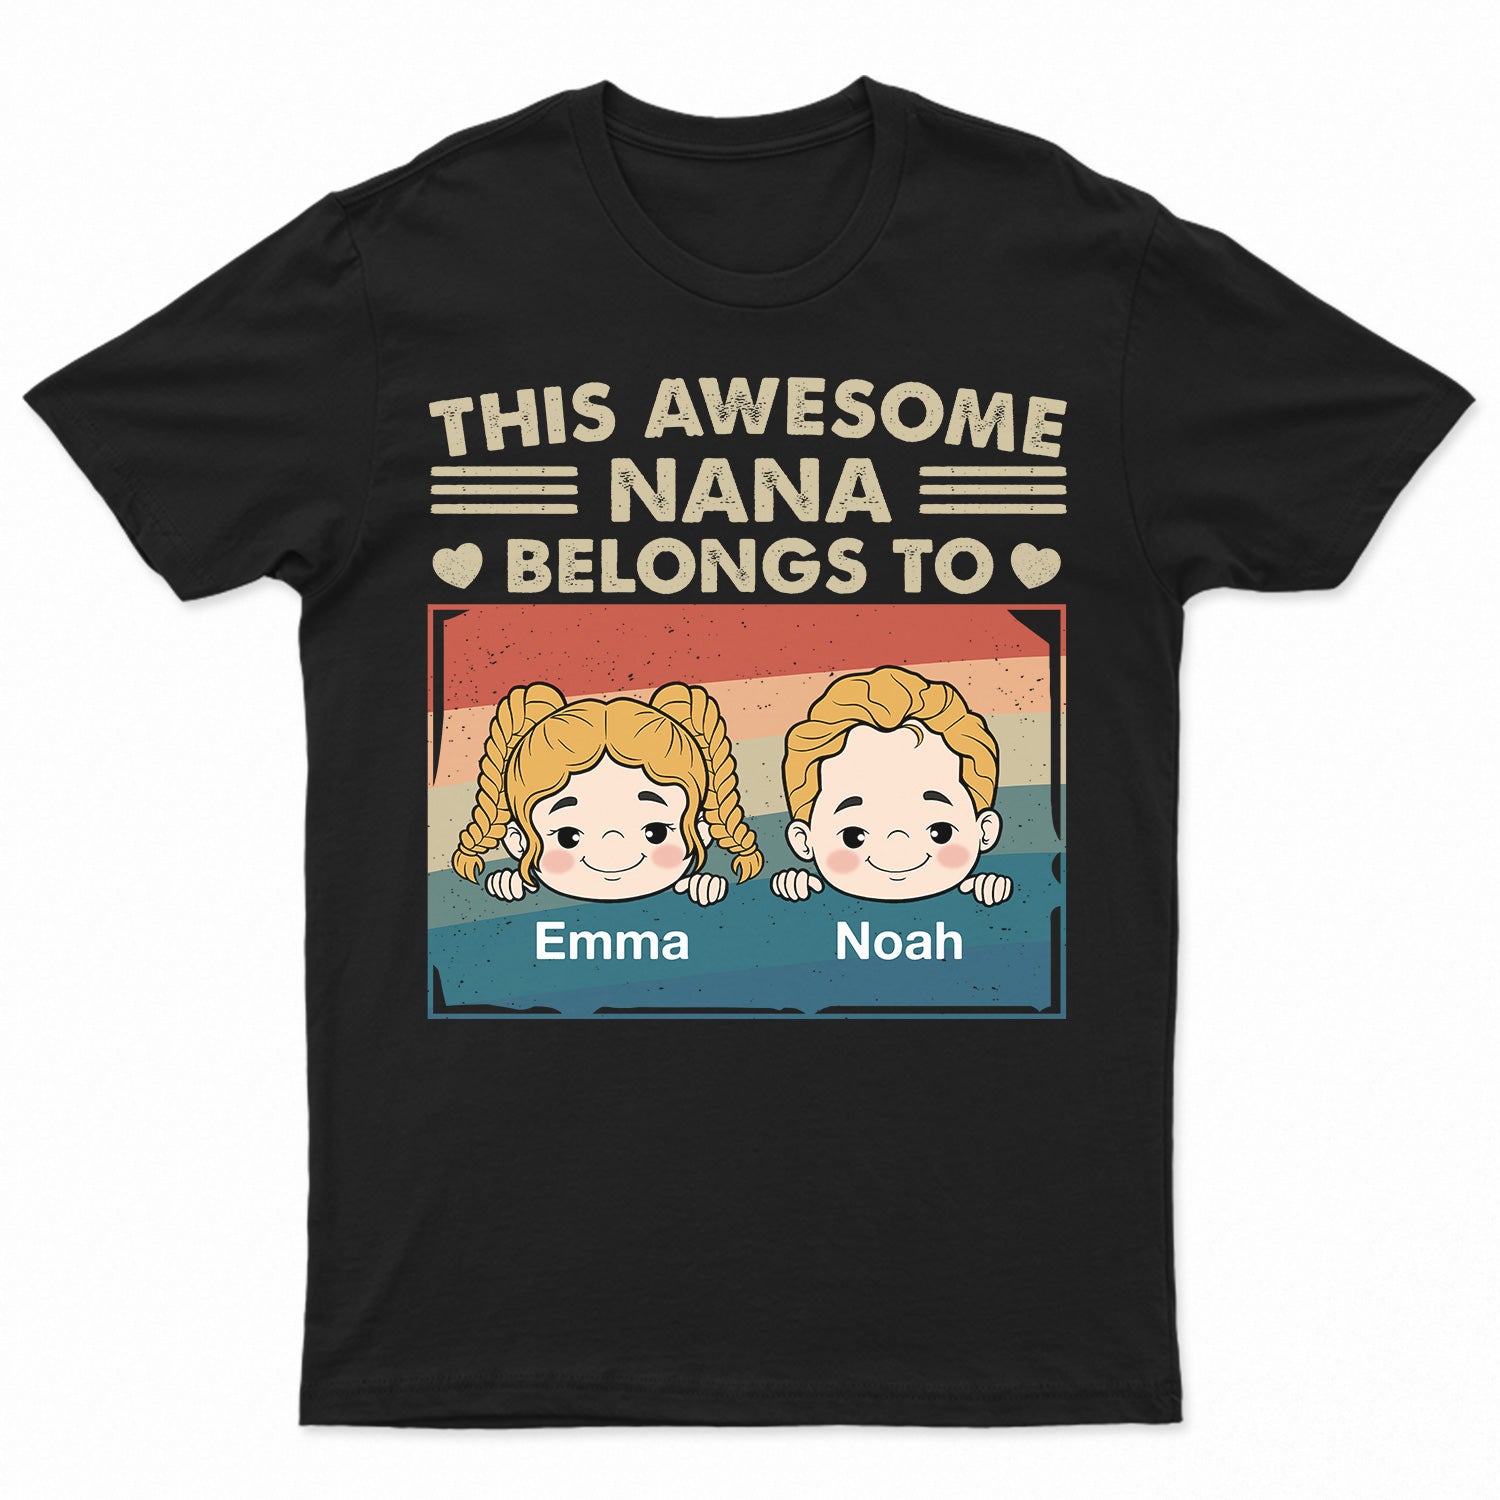 This Awesome Nana Mommy Daddy Belongs To - Funny Gift For Dad, Mom, Grandma, Grandpa - Personalized T Shirt